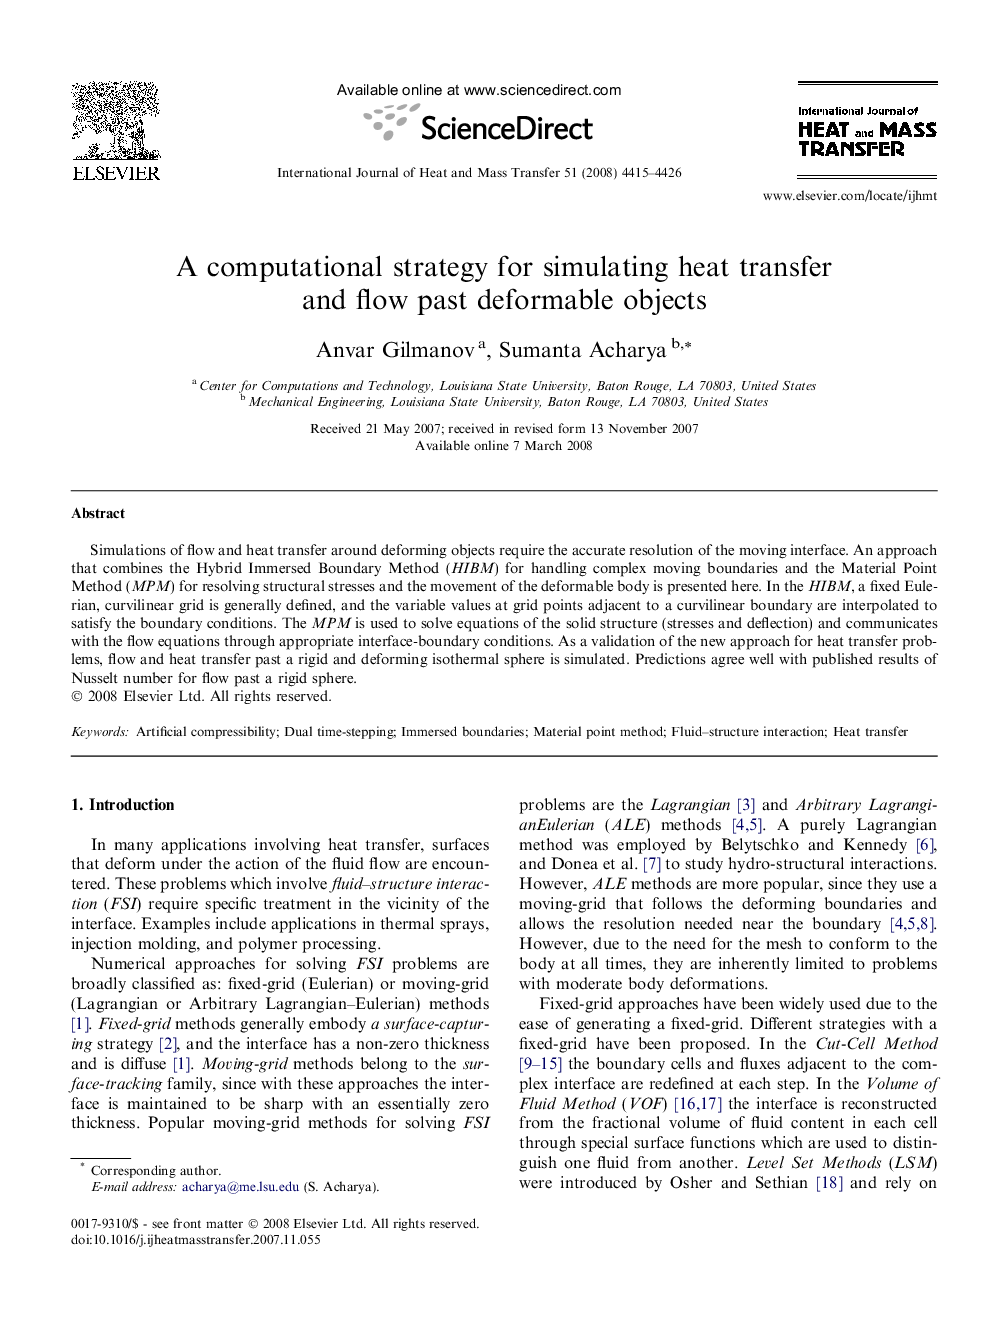 A computational strategy for simulating heat transfer and flow past deformable objects